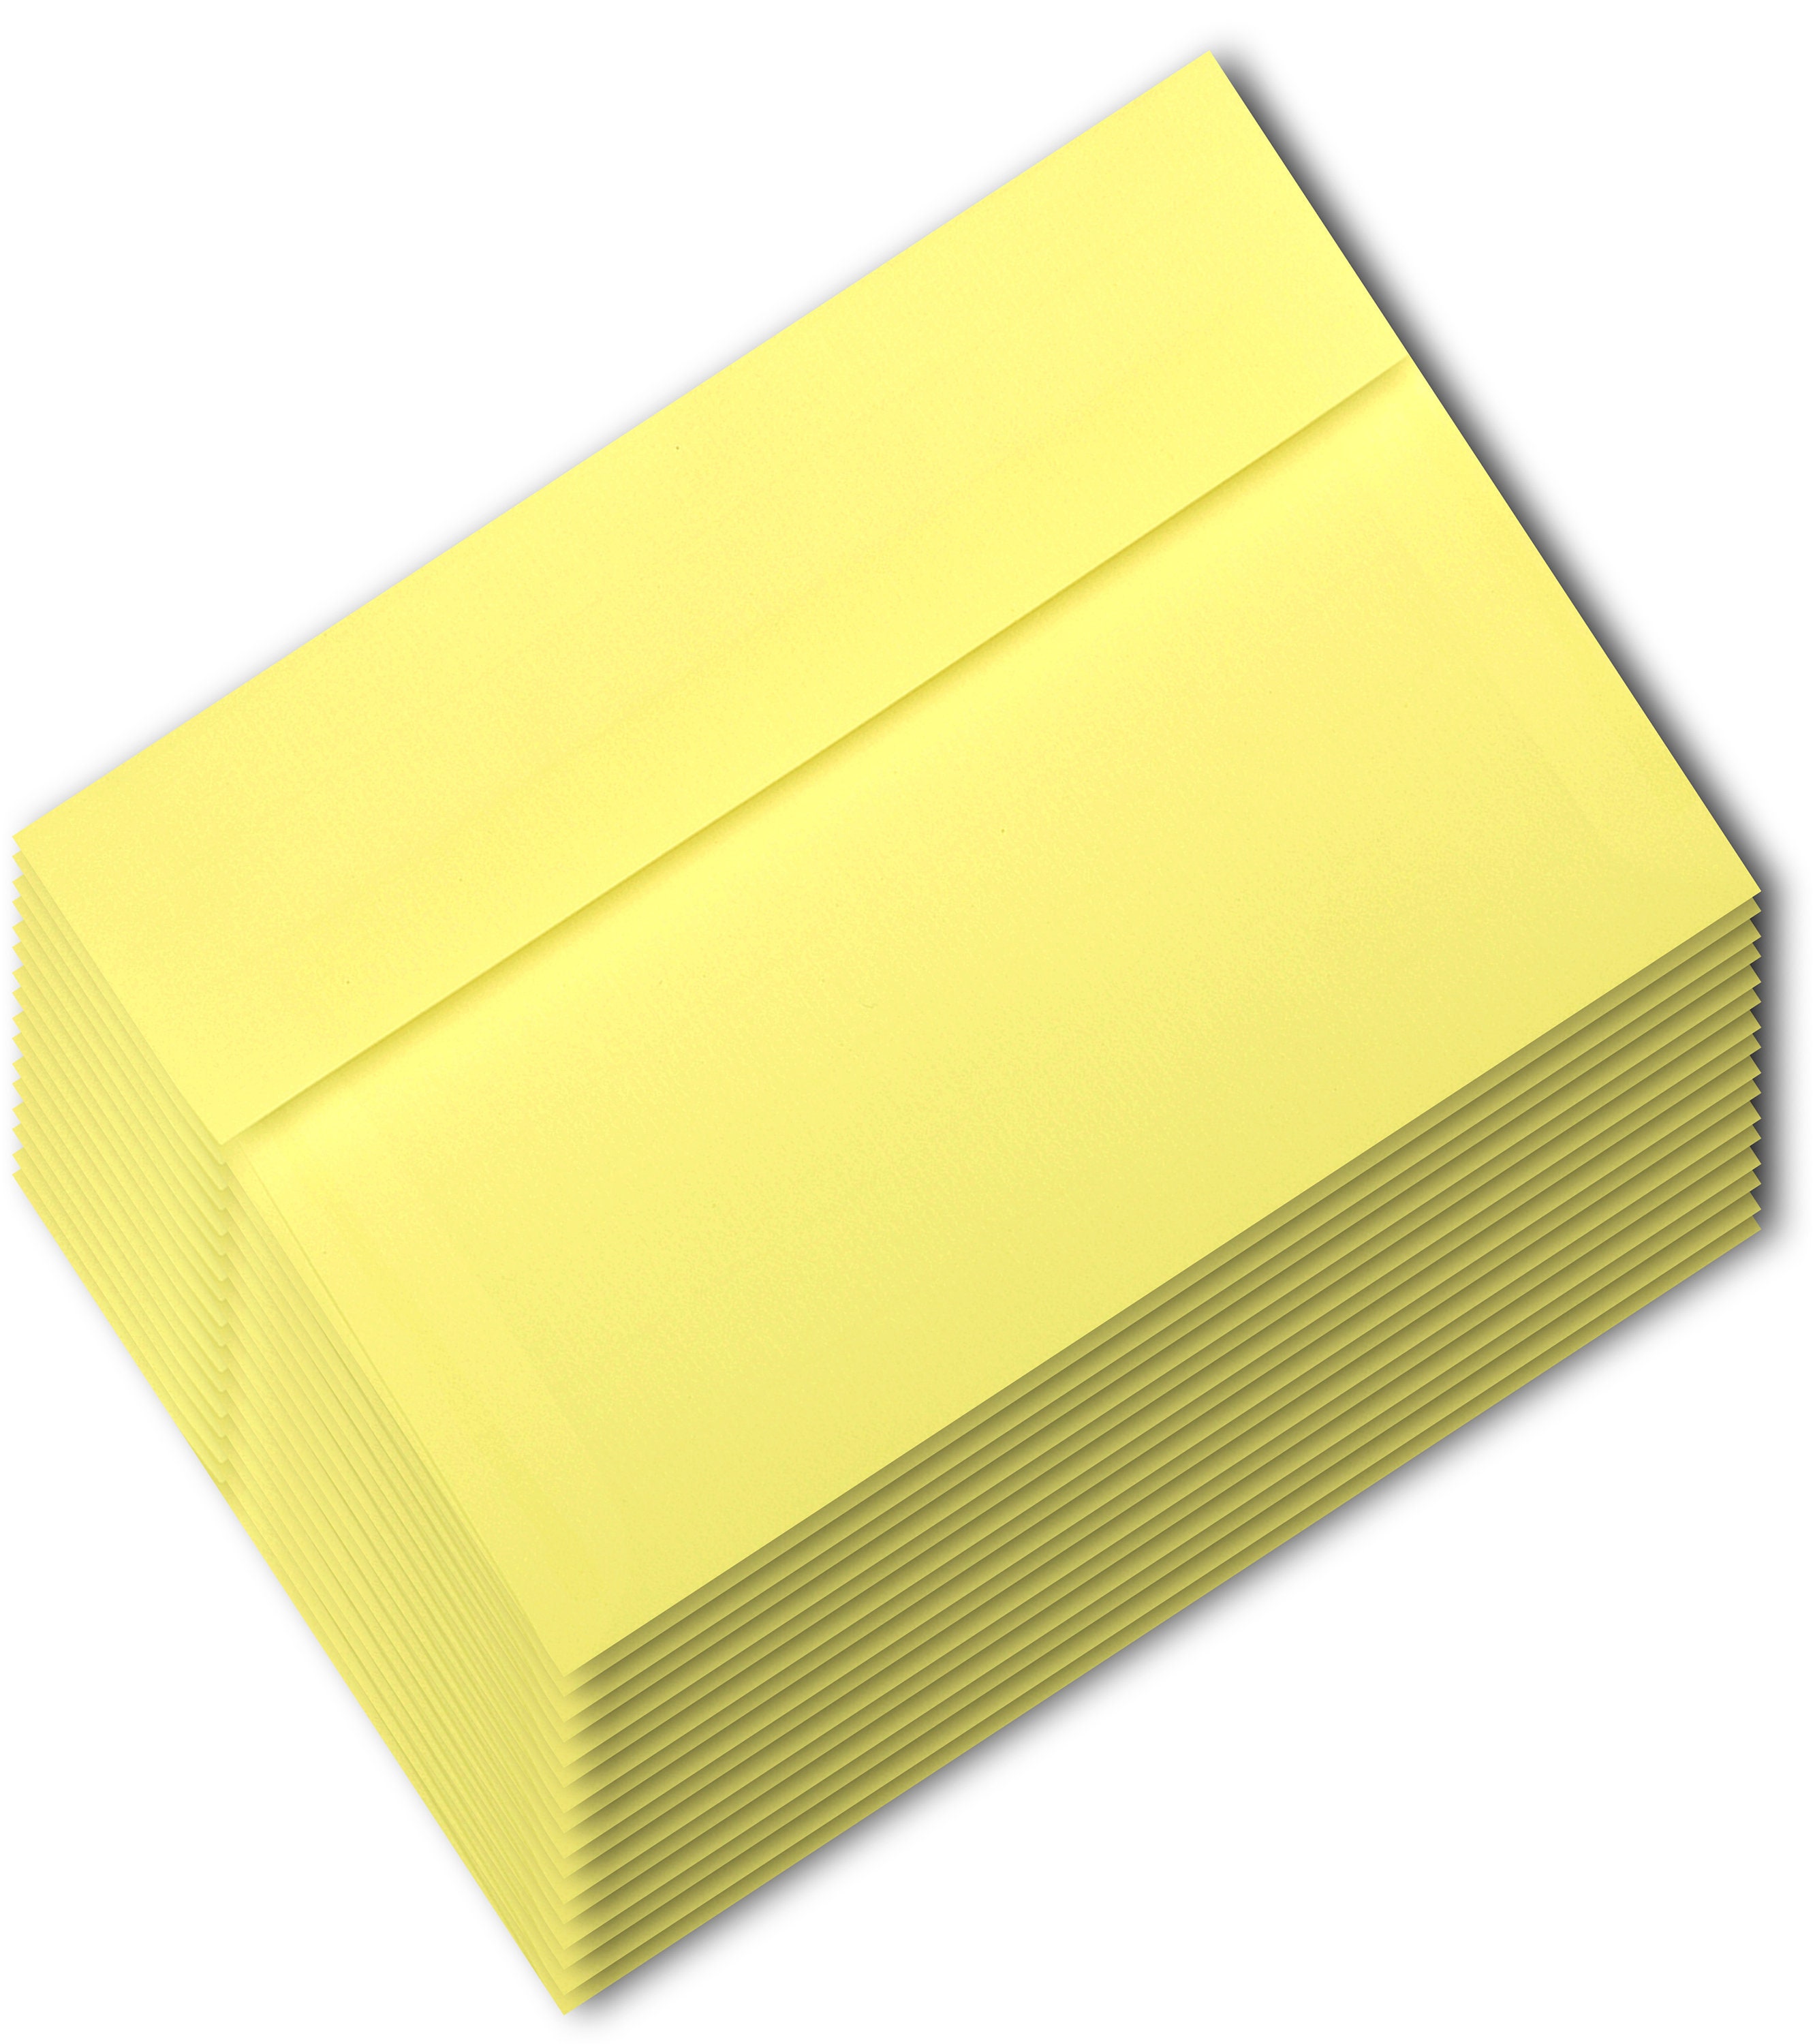 Canary Yellow Pastel 100 Boxed A7 Envelopes for 5 x 7 Invitations Announcements Communions from The Envelope Gallery